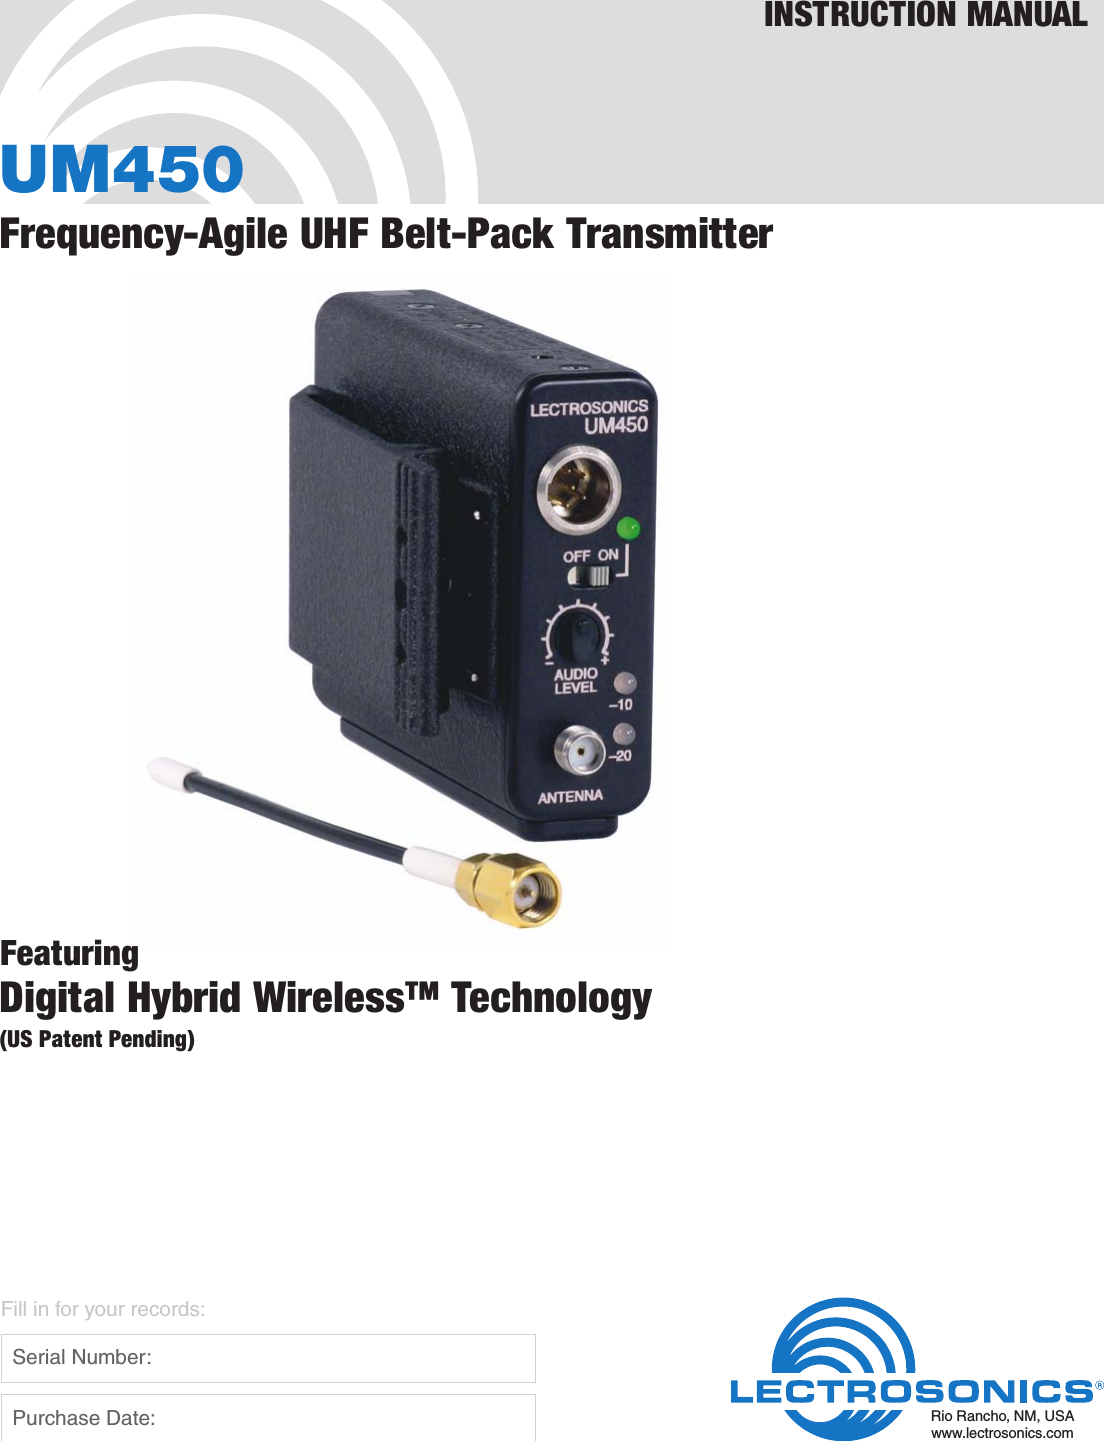 UM450Frequency-Agile UHF Belt-Pack TransmitterINSTRUCTION MANUALRio Rancho, NM, USAwww.lectrosonics.comFill in for your records:  Serial Number:  Purchase Date:FeaturingDigital Hybrid Wireless™ Technology(US Patent Pending)